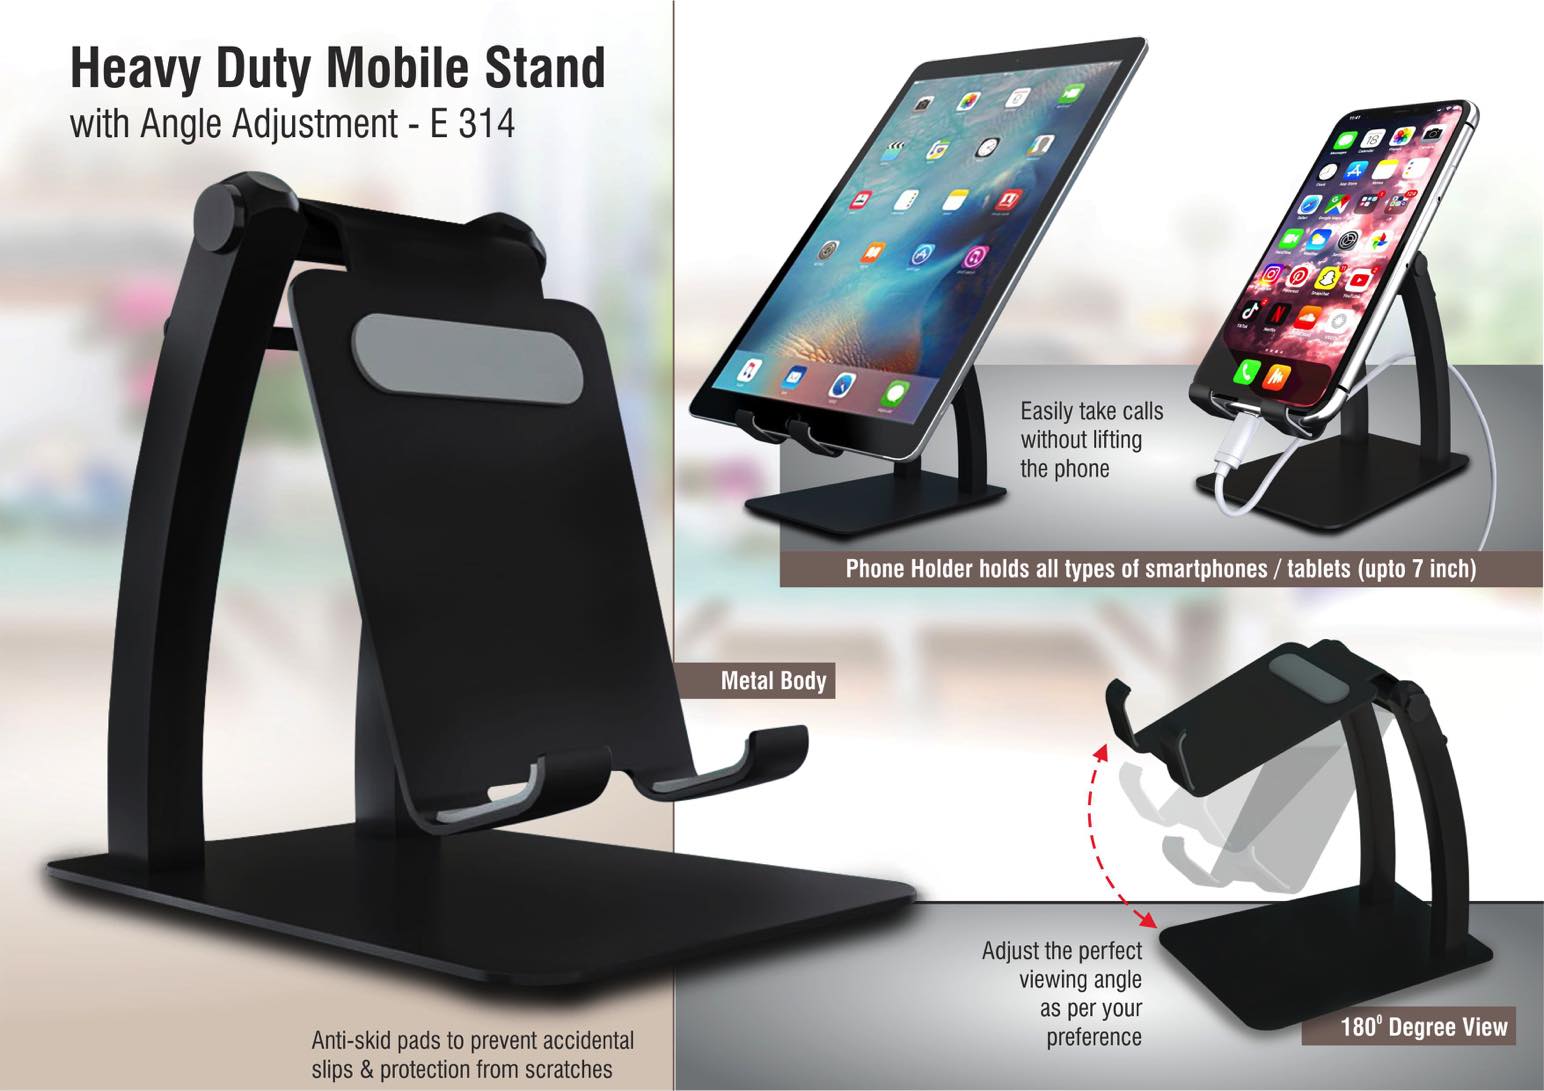 Heavy Duty Mobile Stand With Angle Adjustment